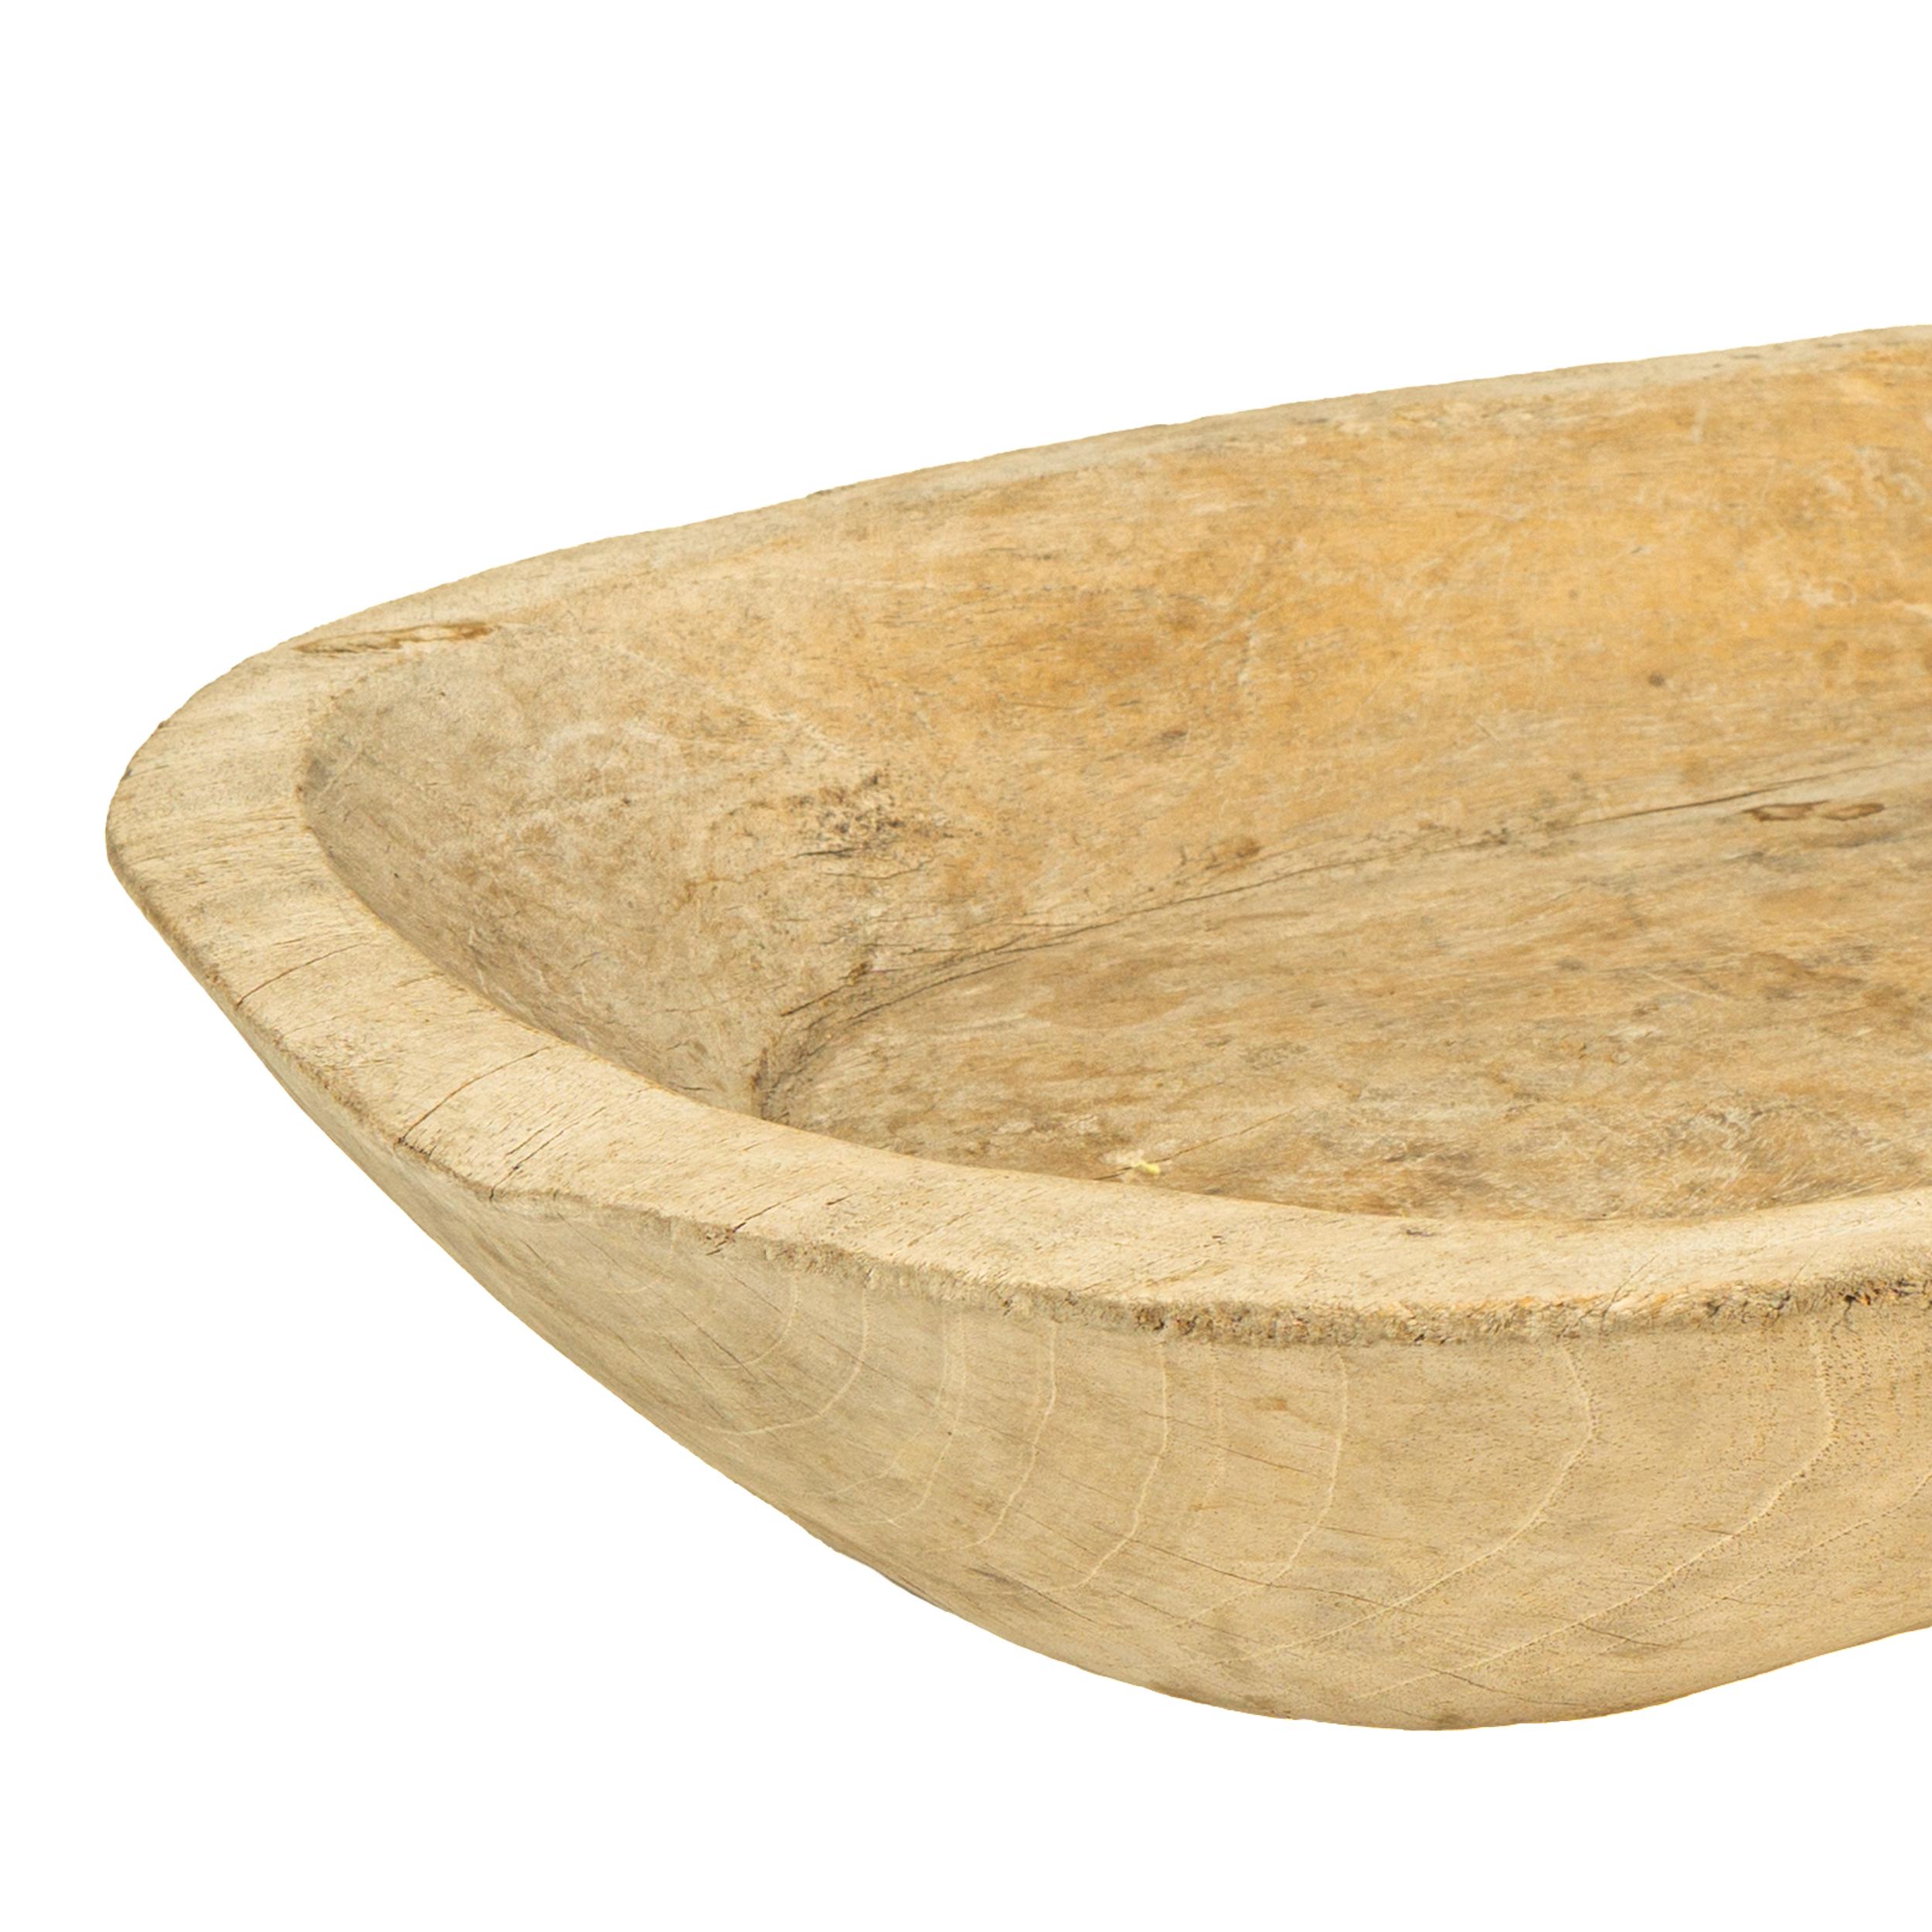 Wood Mesquite Trough Bowl from Zacatecas, Northern México, Late 19th Century For Sale